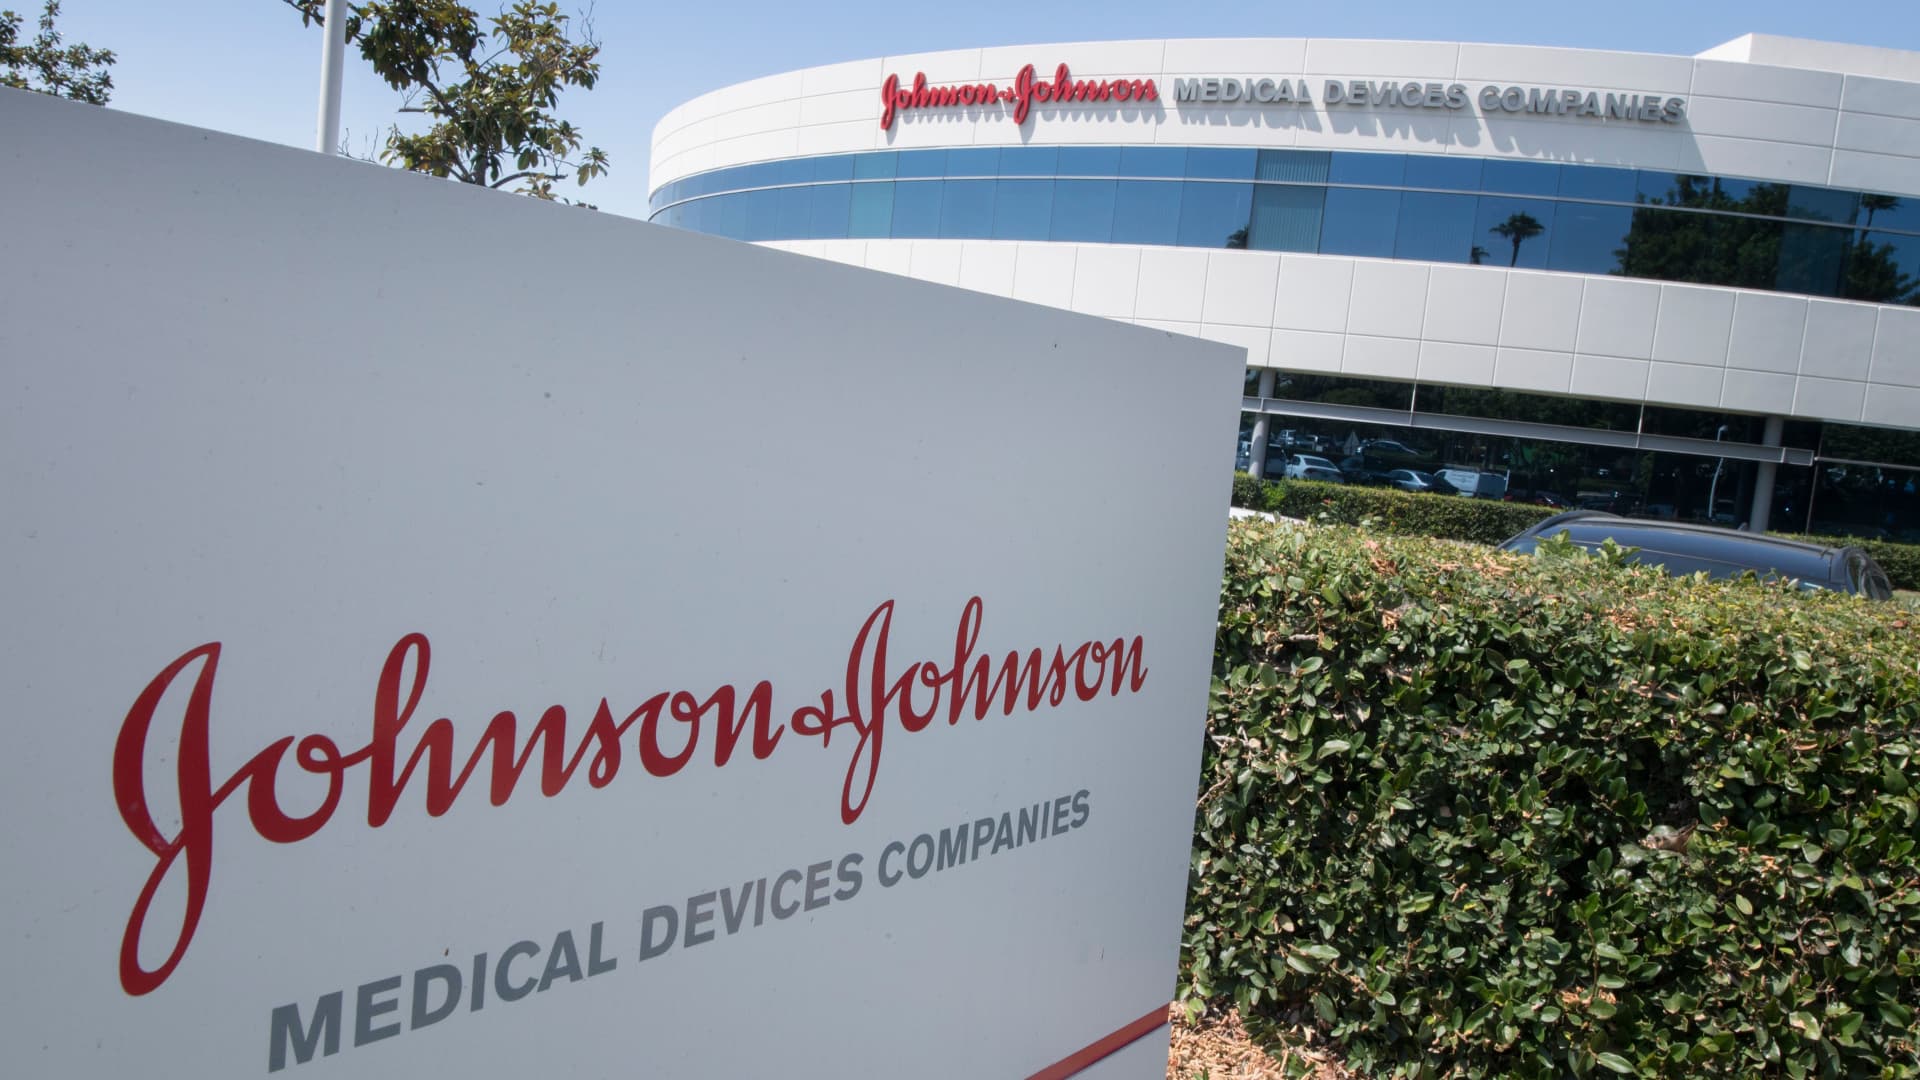 Johnson & Johnson beats on earnings and hikes outlook as medtech, pharmaceutical sales surge